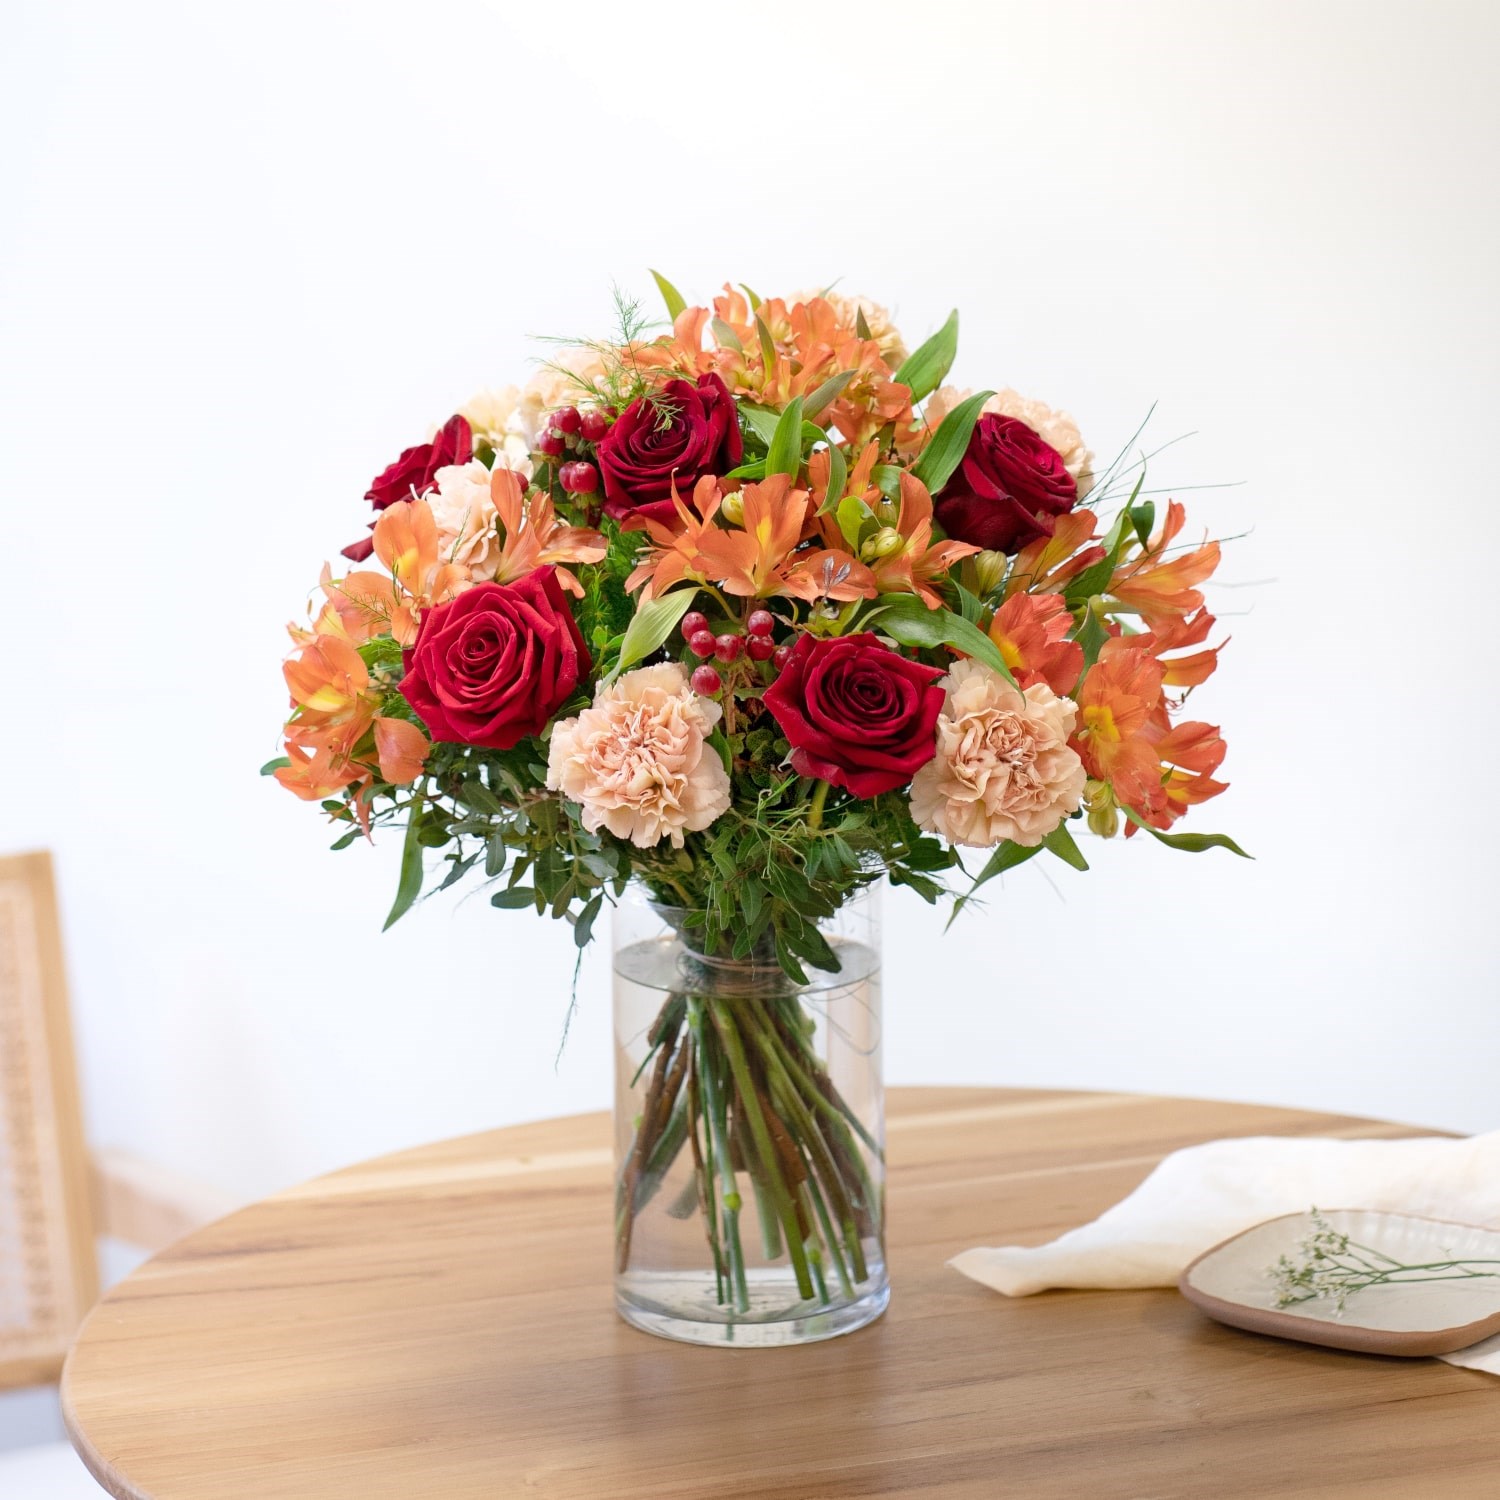 Mixed Bouquet of warm orange and red Shades